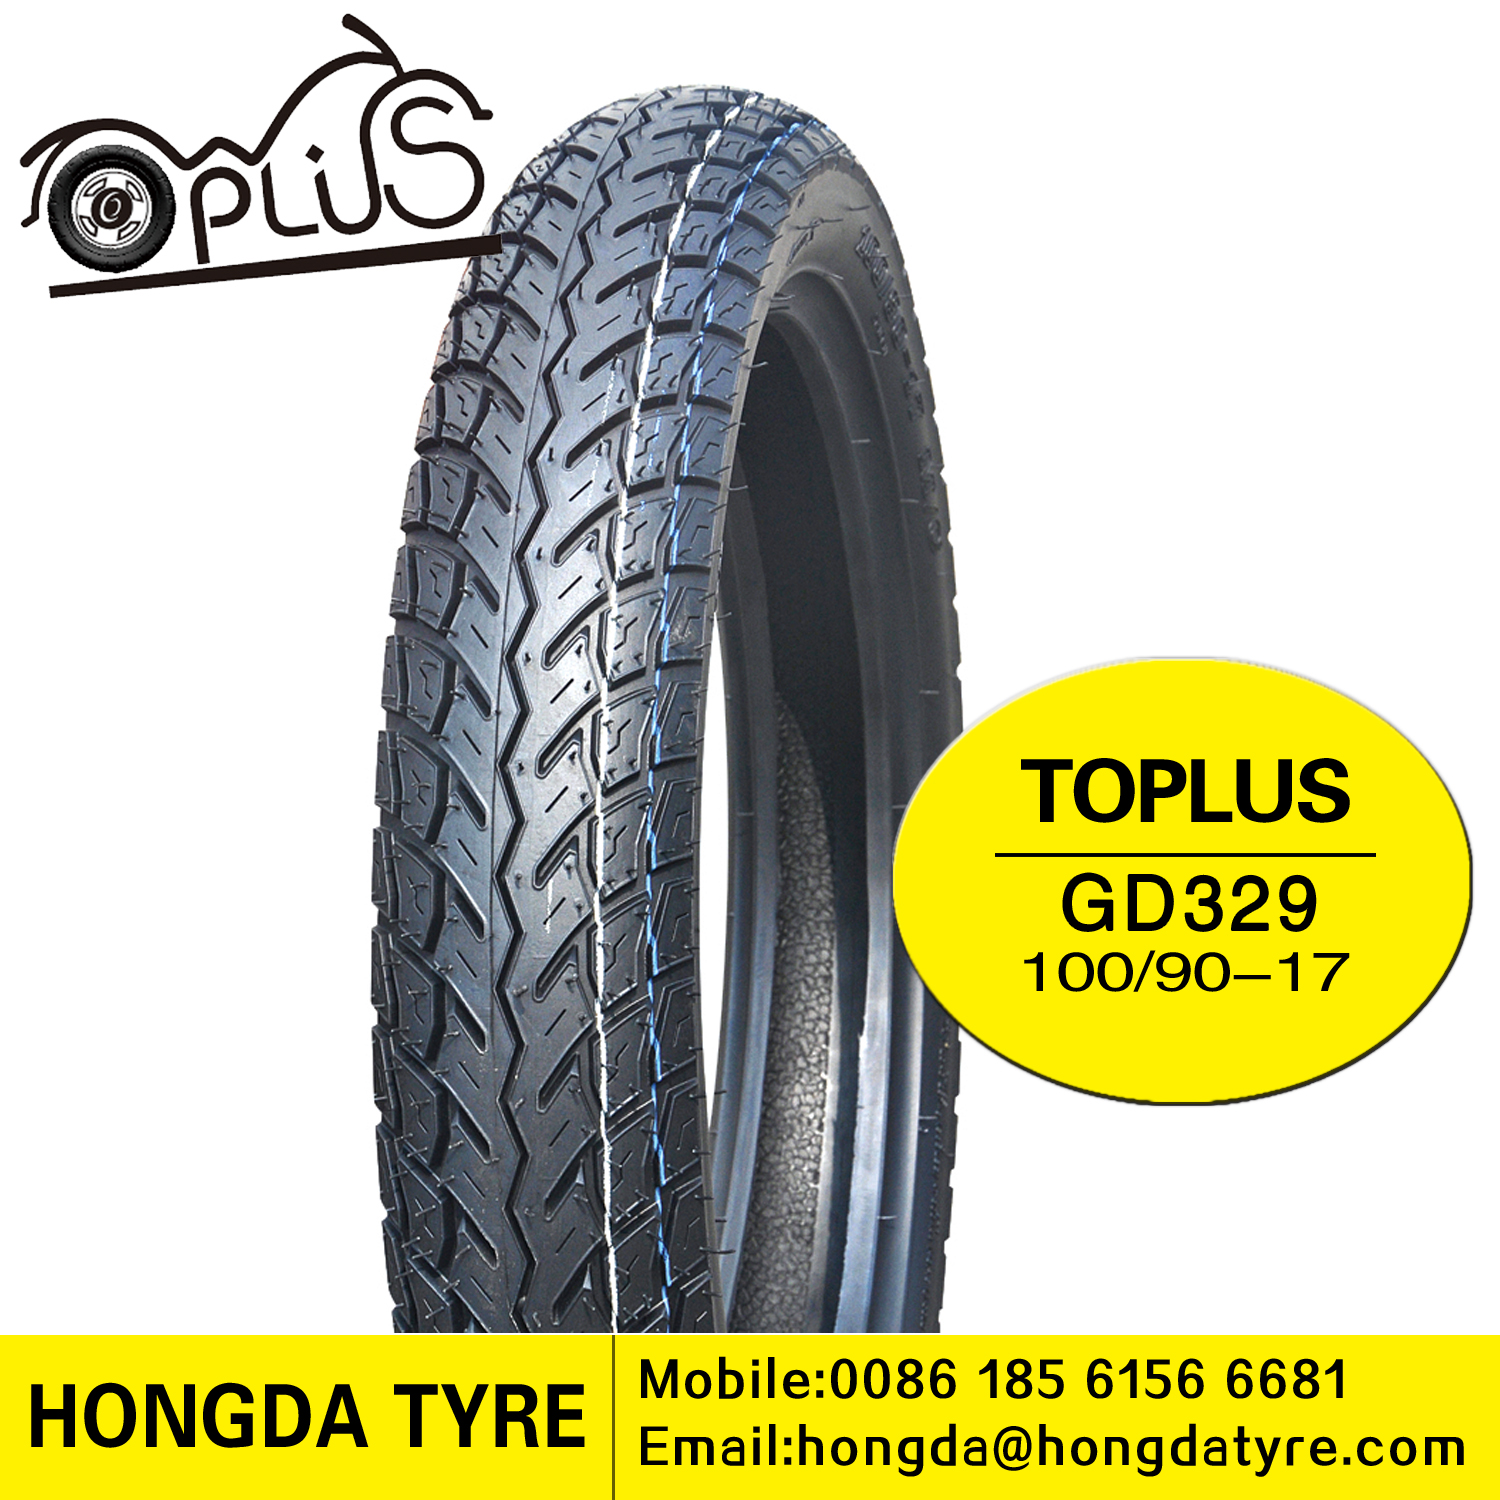 Motorcycle tyre GD329